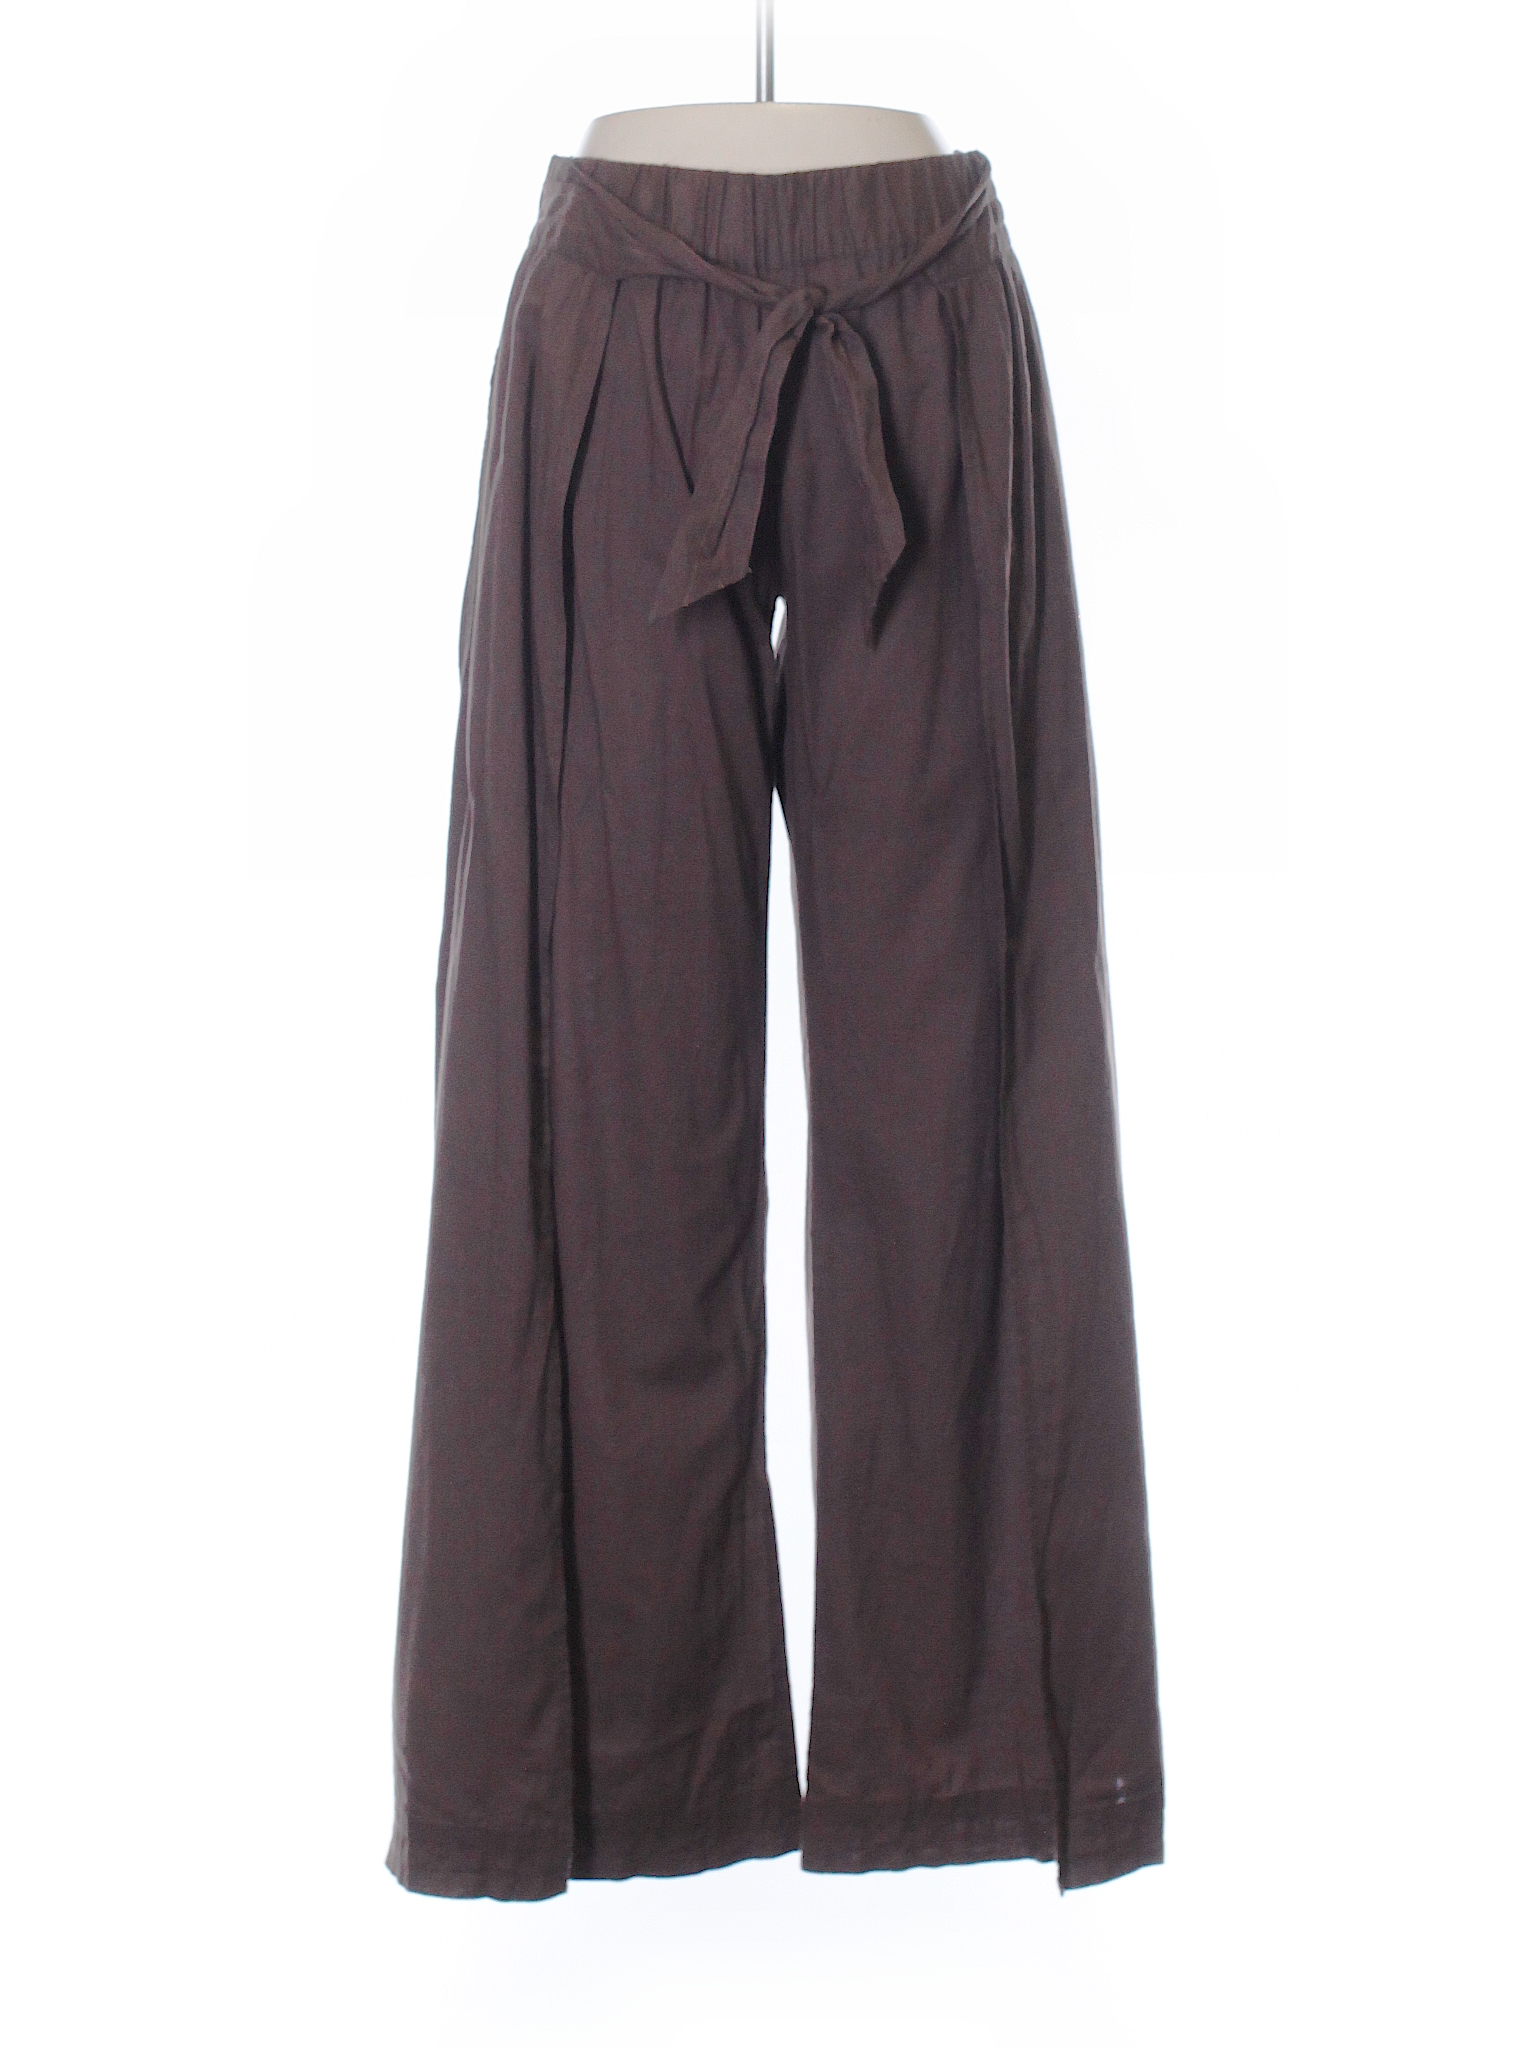 Lilka 100% Cotton Solid Brown Casual Pants Size S - 71% off | thredUP